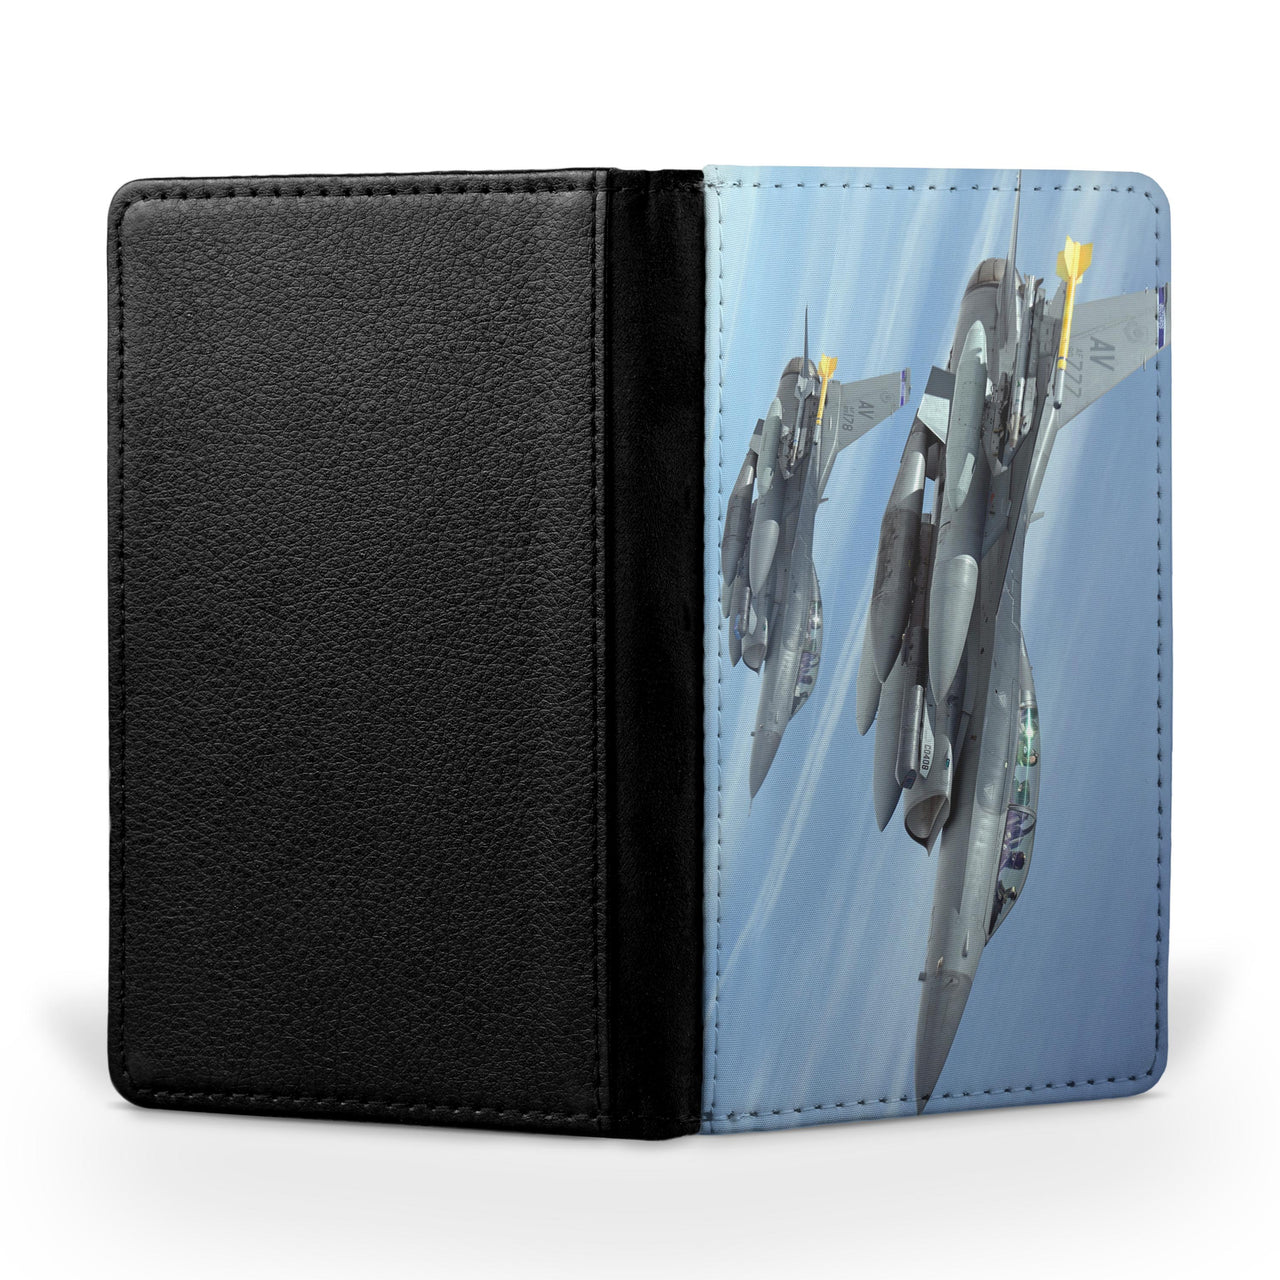 Two Fighting Falcon Printed Passport & Travel Cases